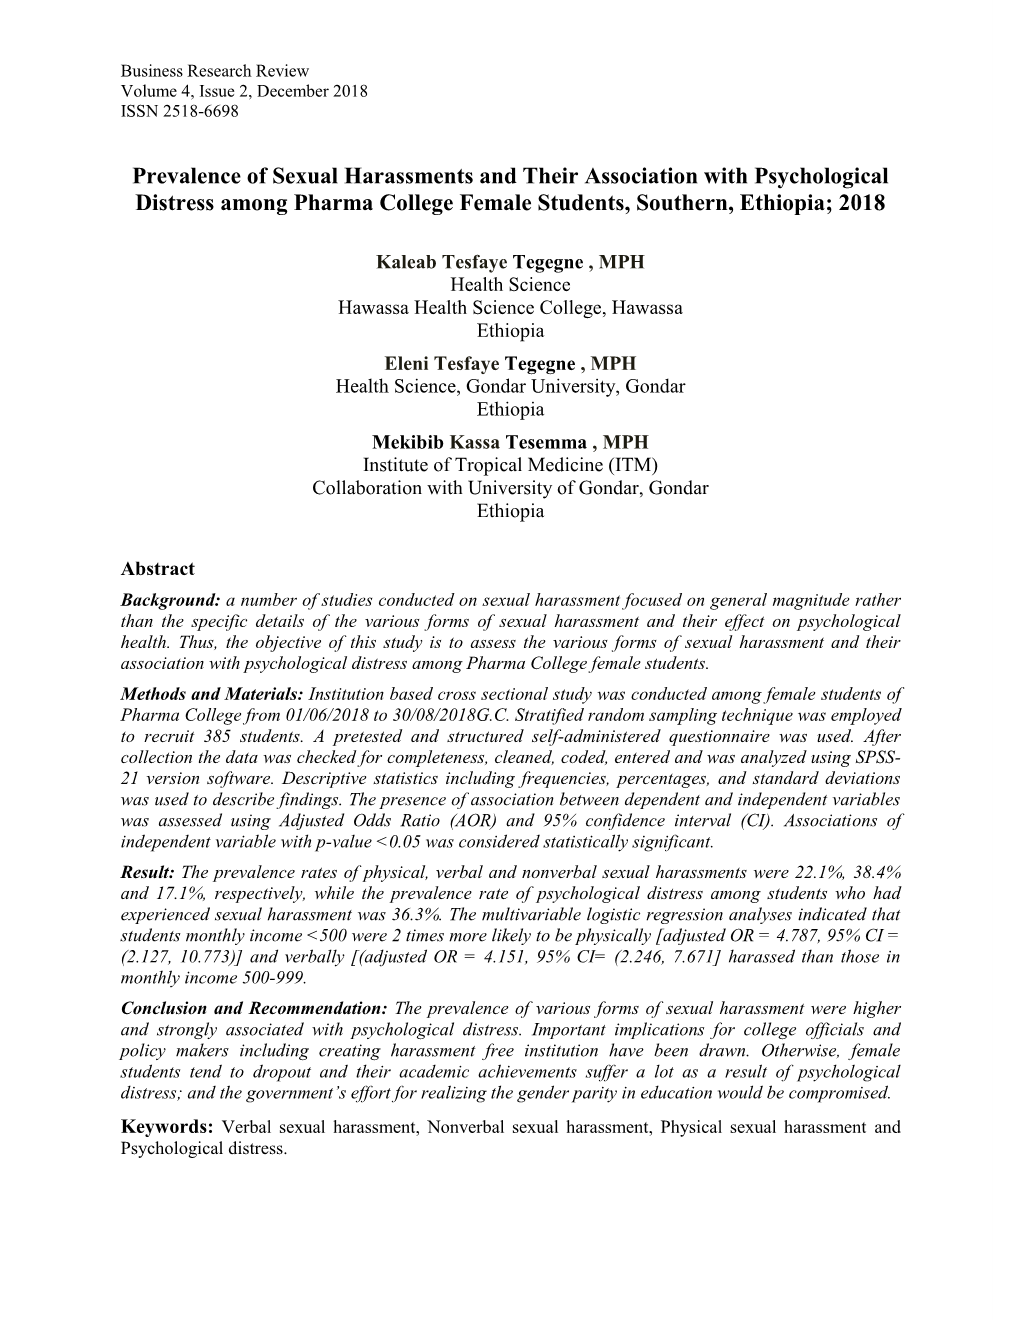 Prevalence of Sexual Harassments and Their Association with Psychological Distress Among Pharma College Female Students, Southern, Ethiopia; 2018